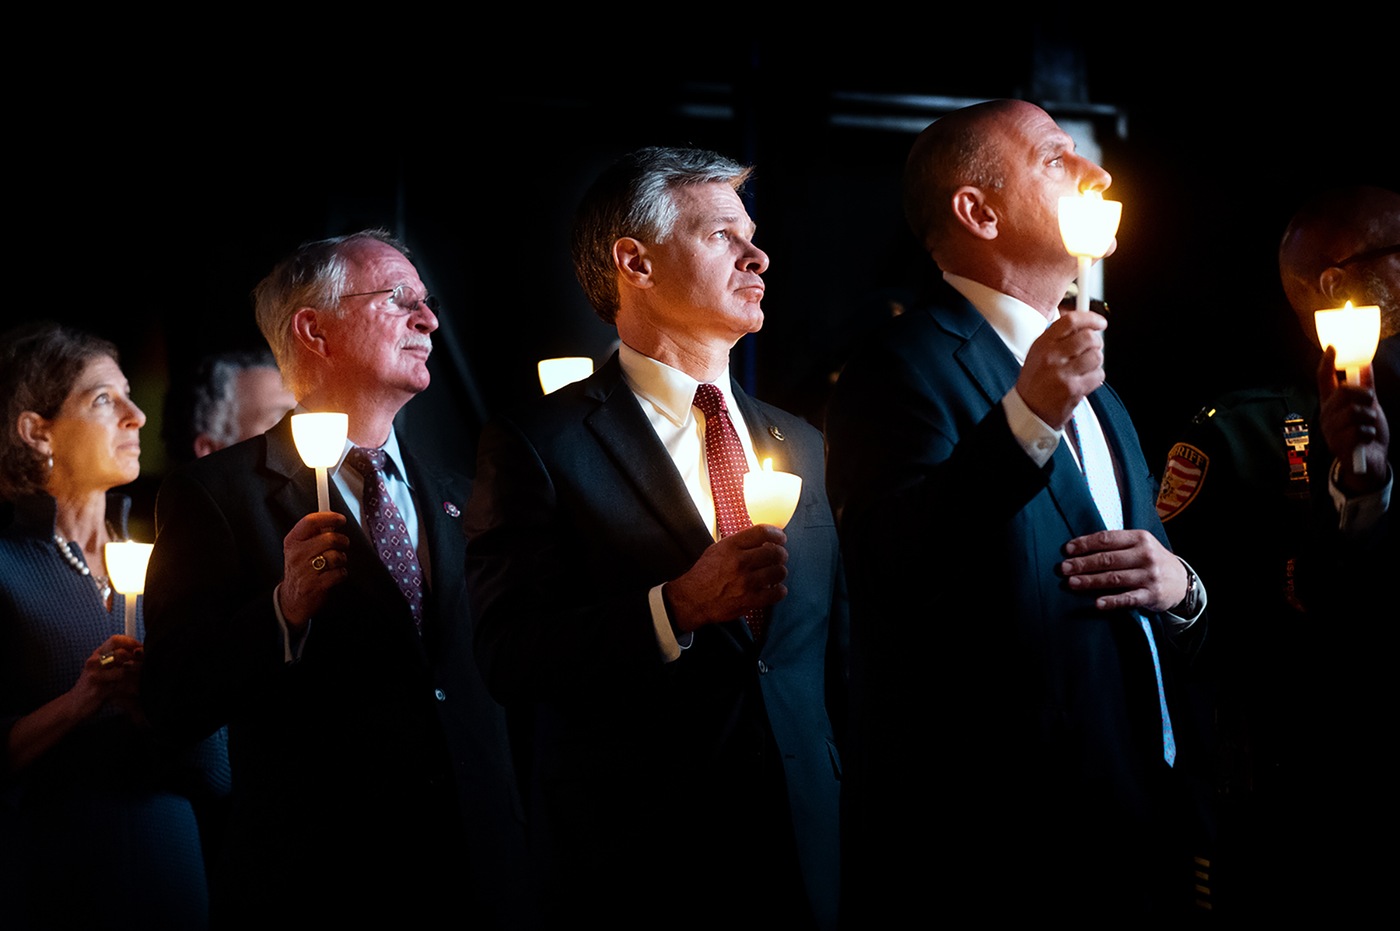 Director Wray attended the 34th Annual Candlelight Vigil